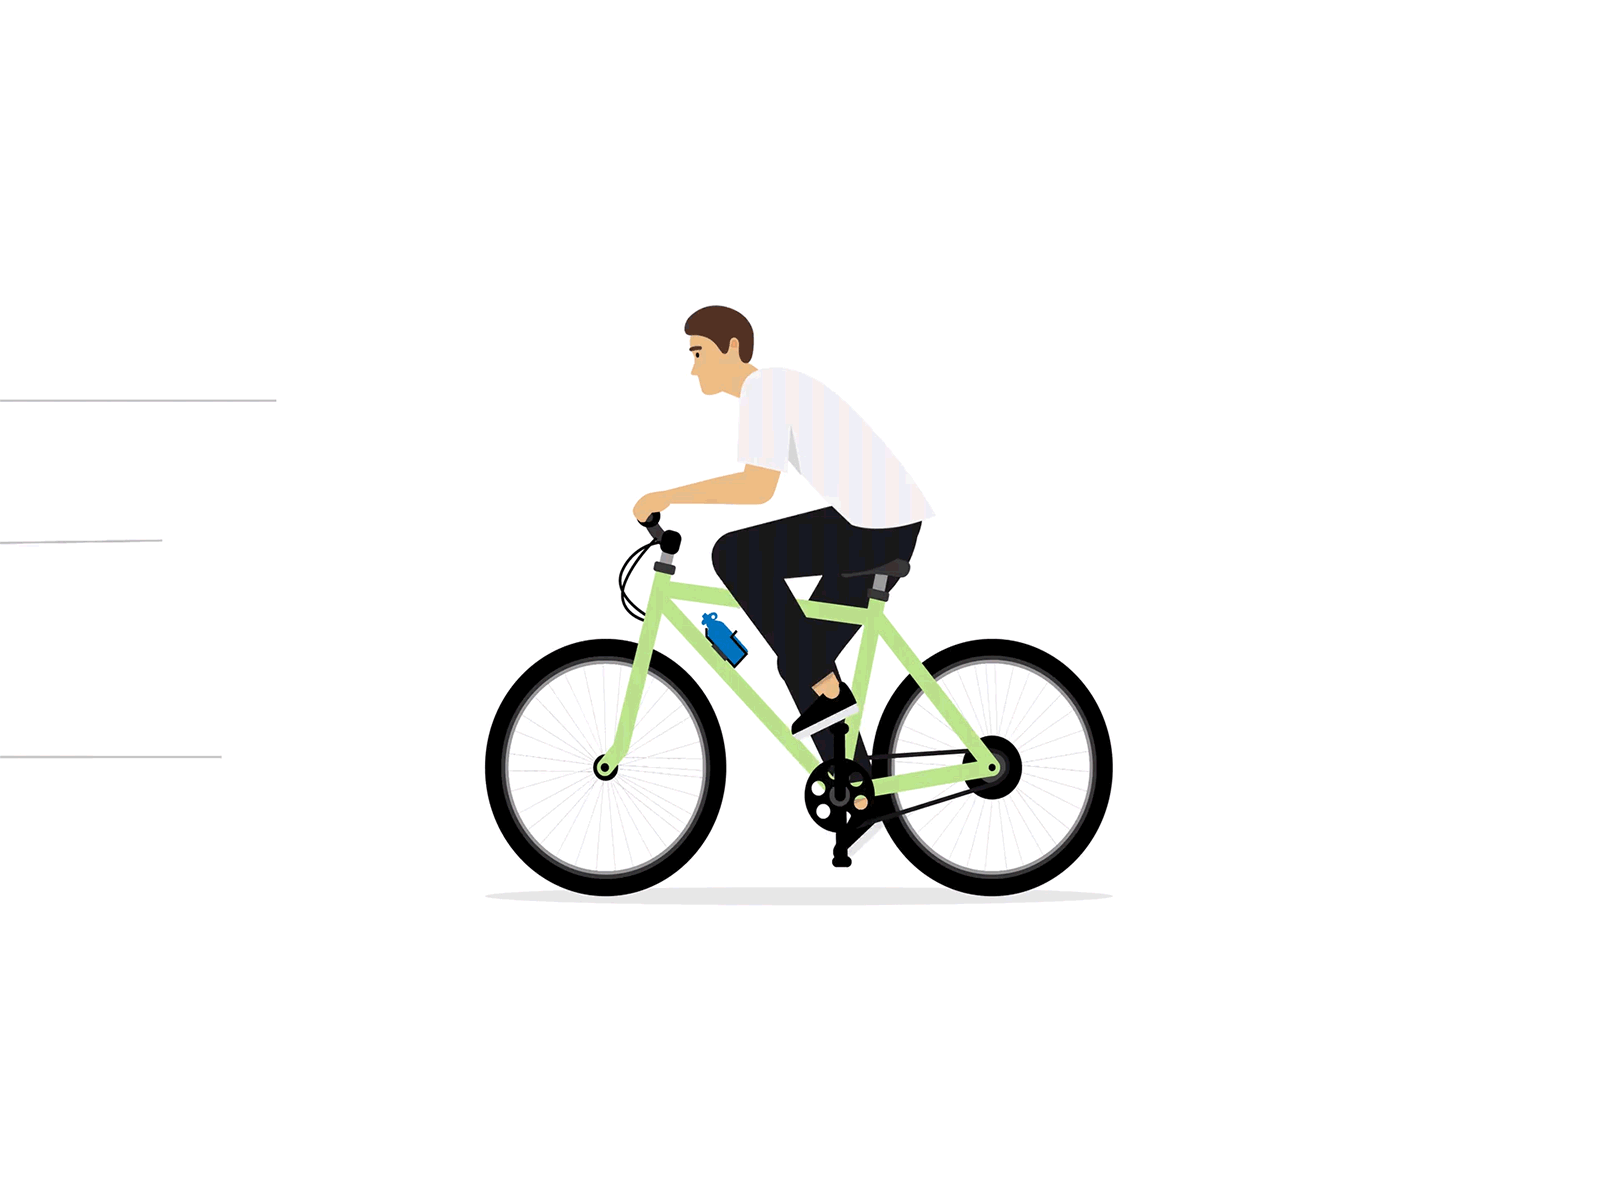 Cycle riding animation by Evgeniy Zimin on Dribbble